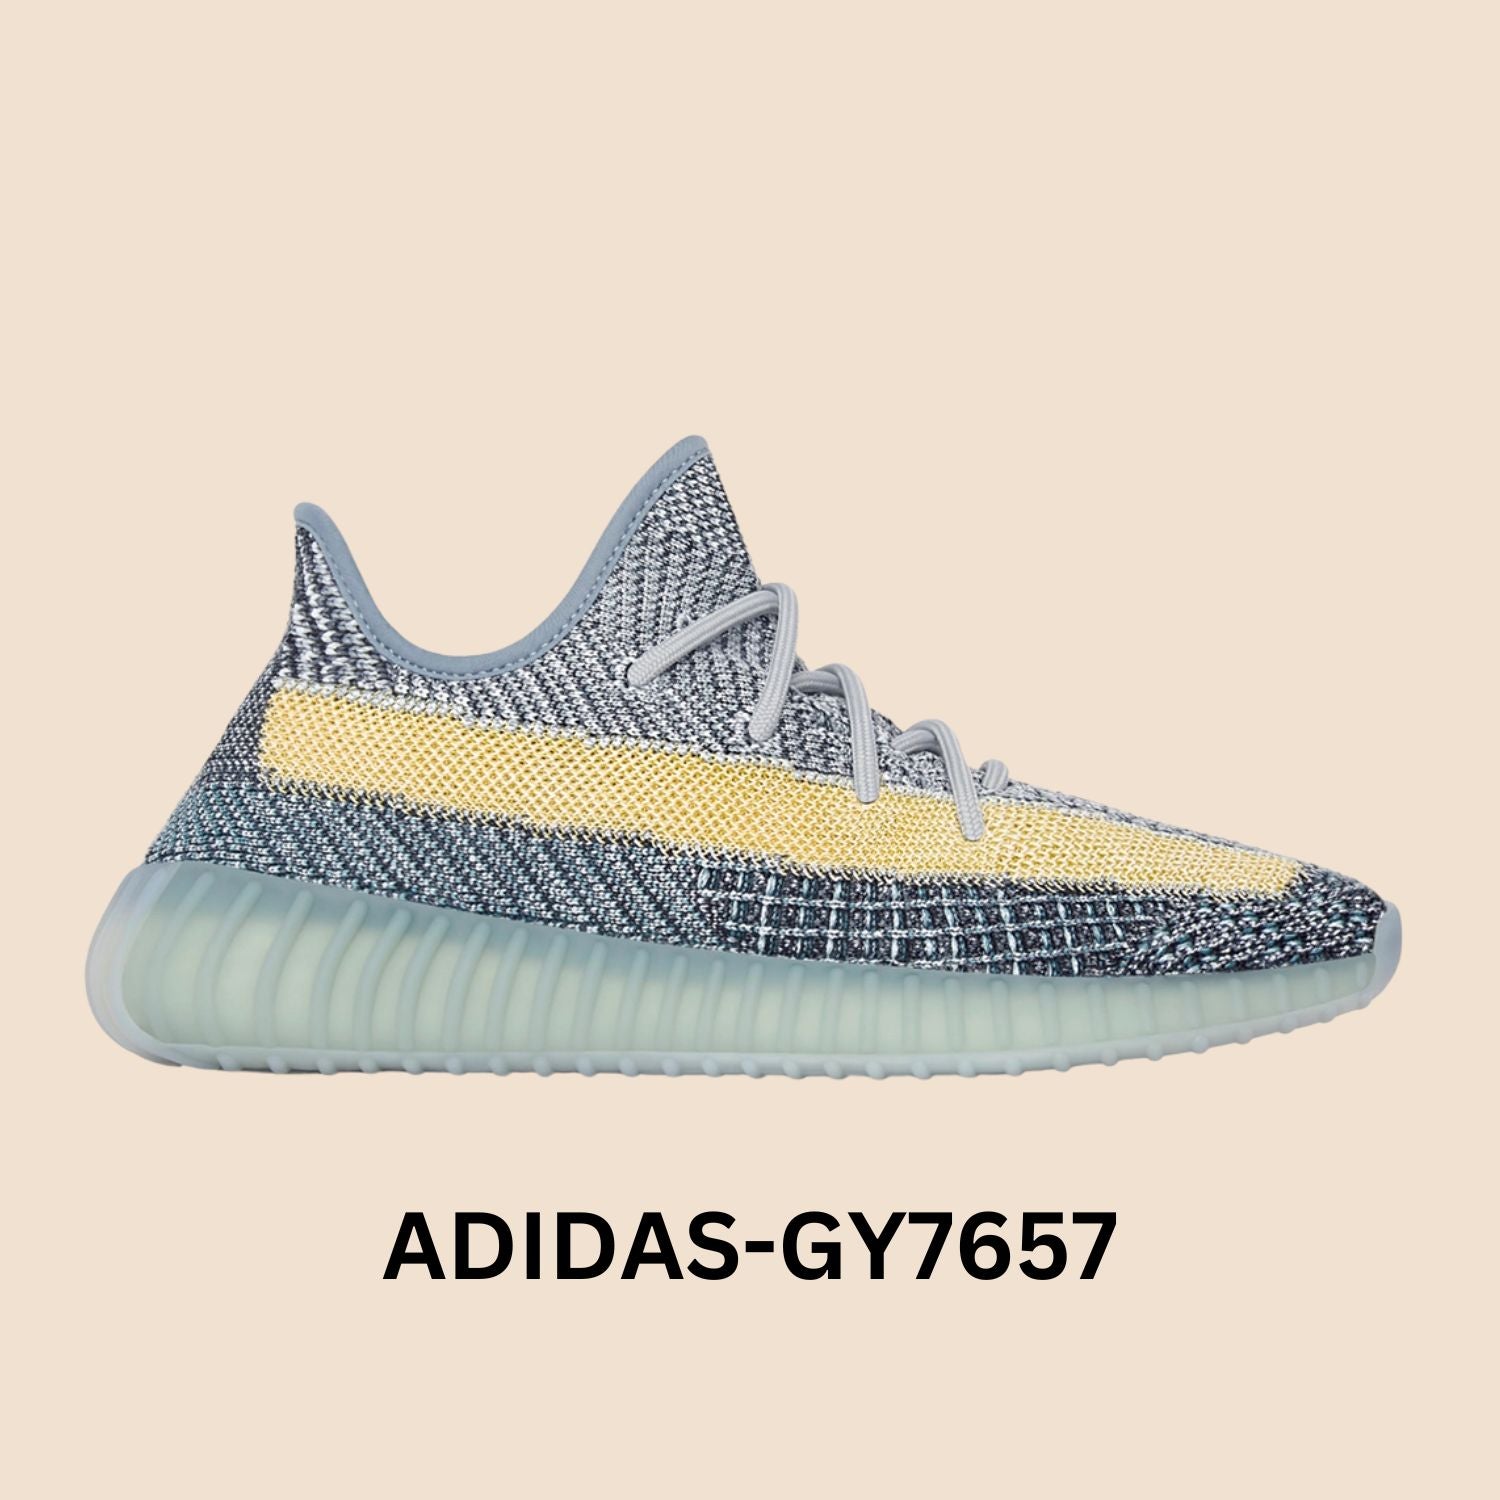 Adidas Yeezy Boost 350 V2 "Ash Blue" Men's Style# GY7657